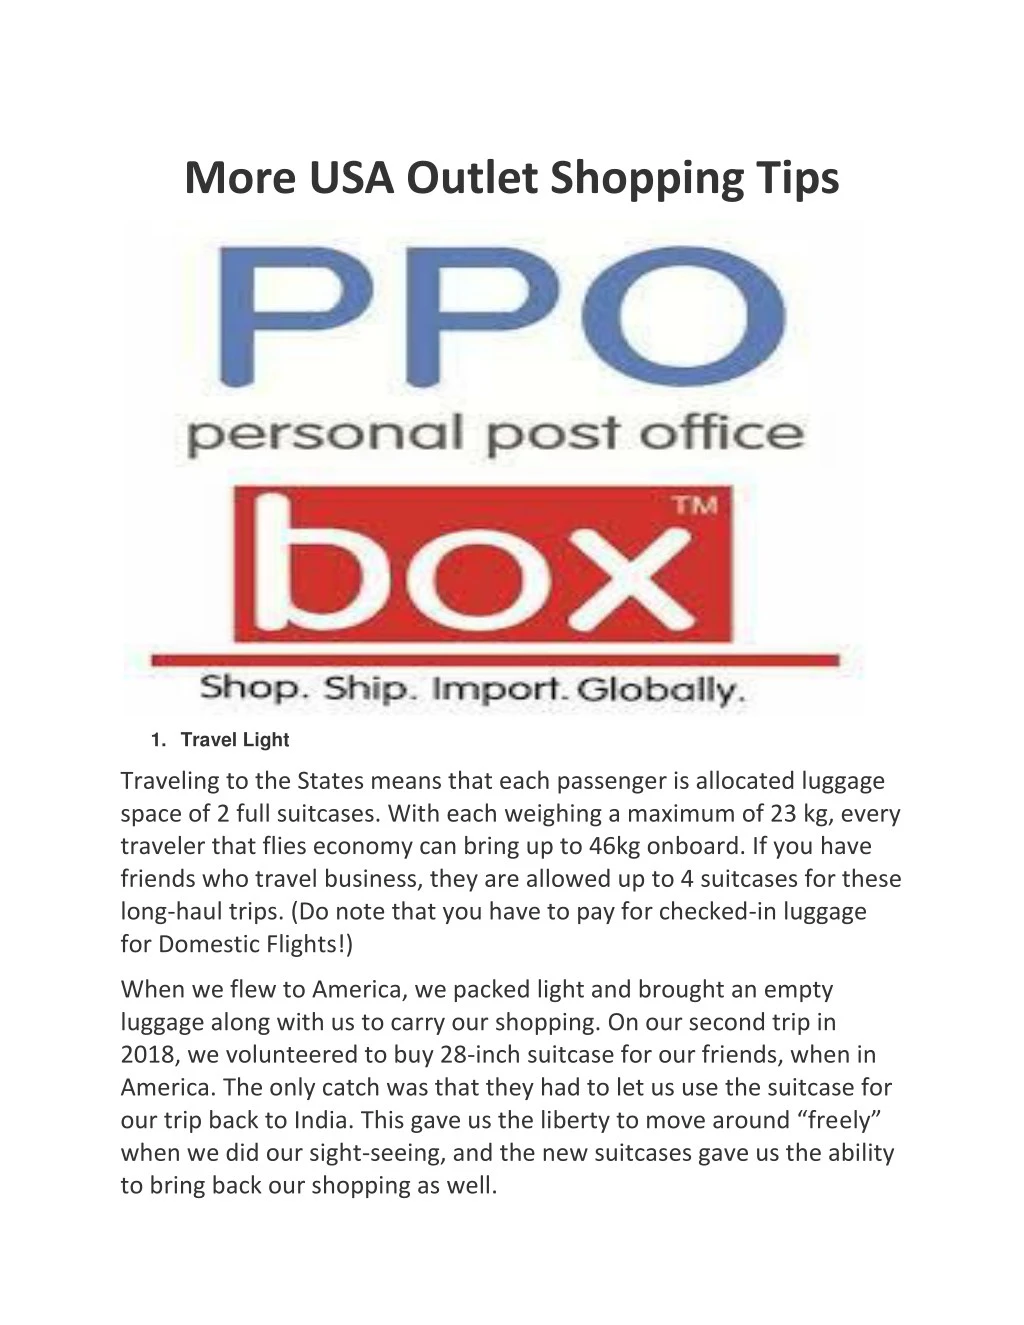 more usa outlet shopping tips